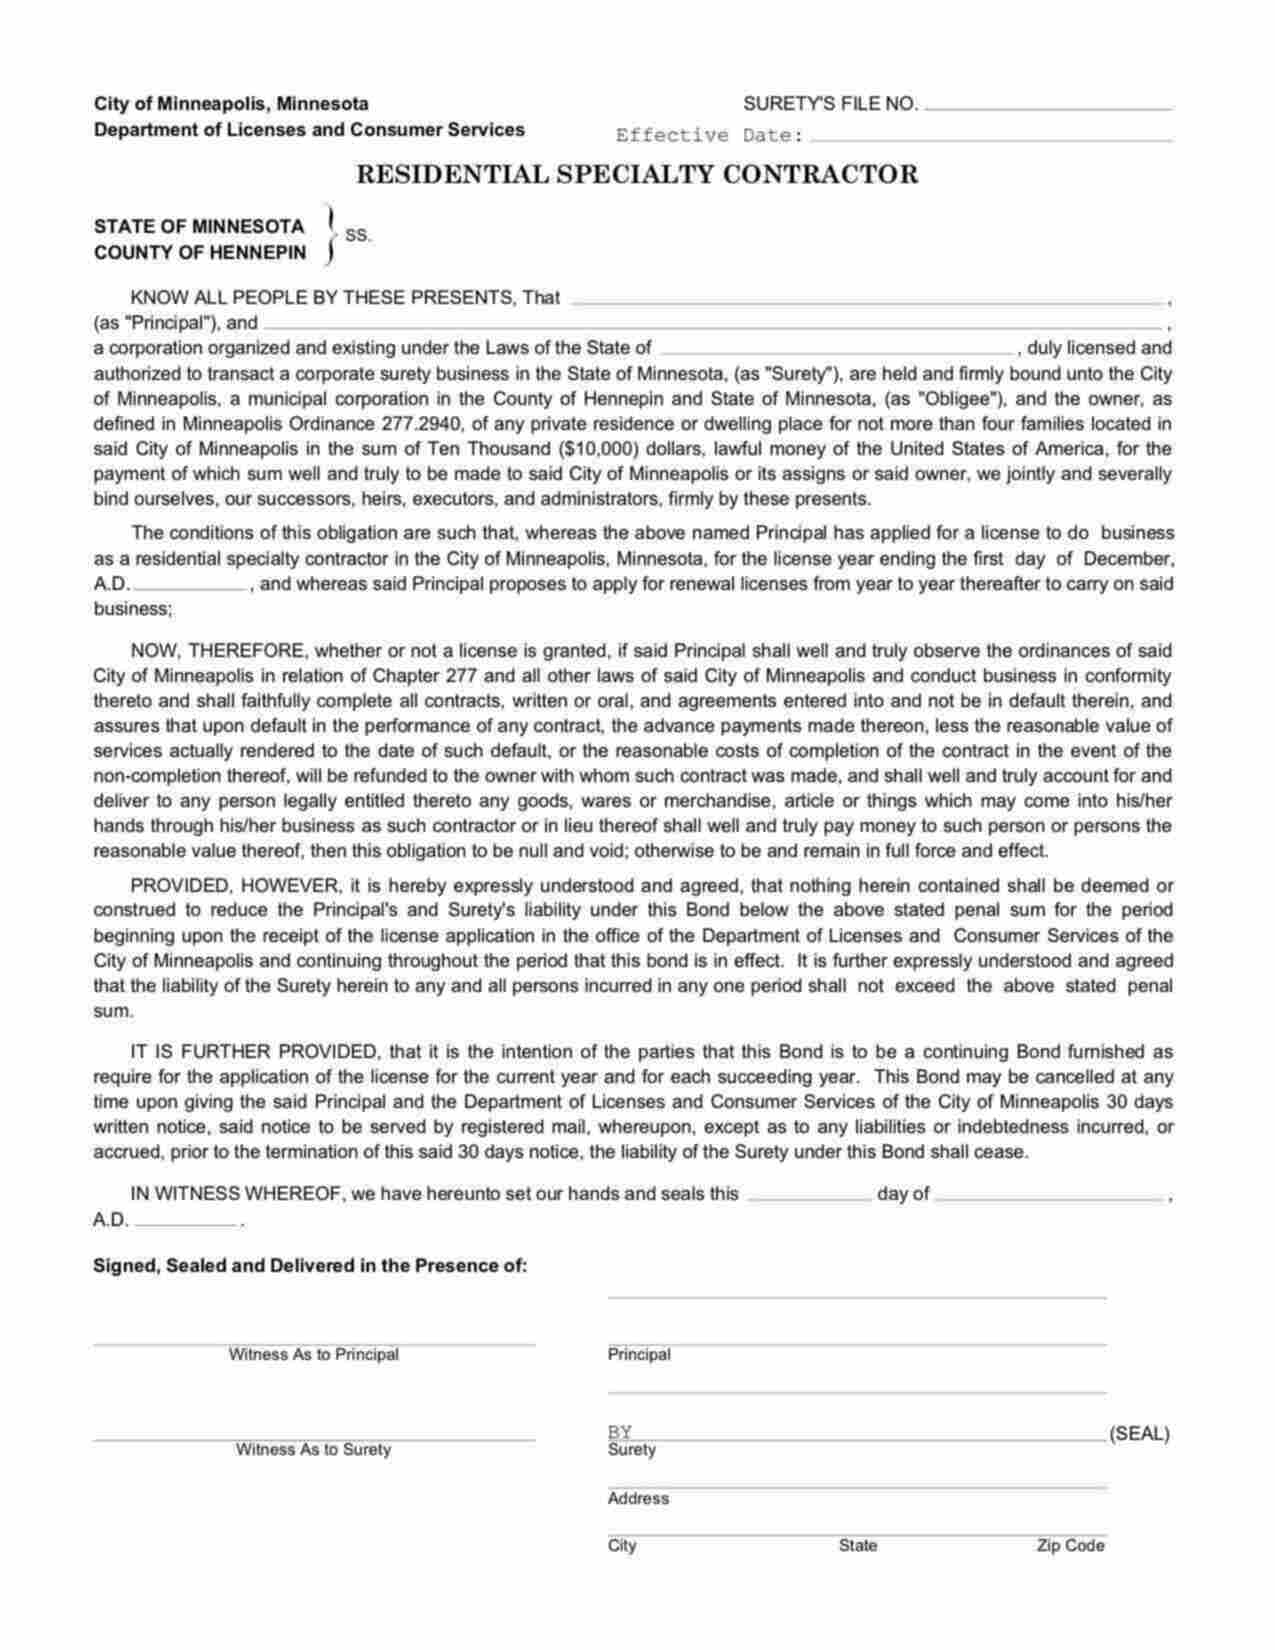 Minnesota Residential Specialty Contractor Bond Form